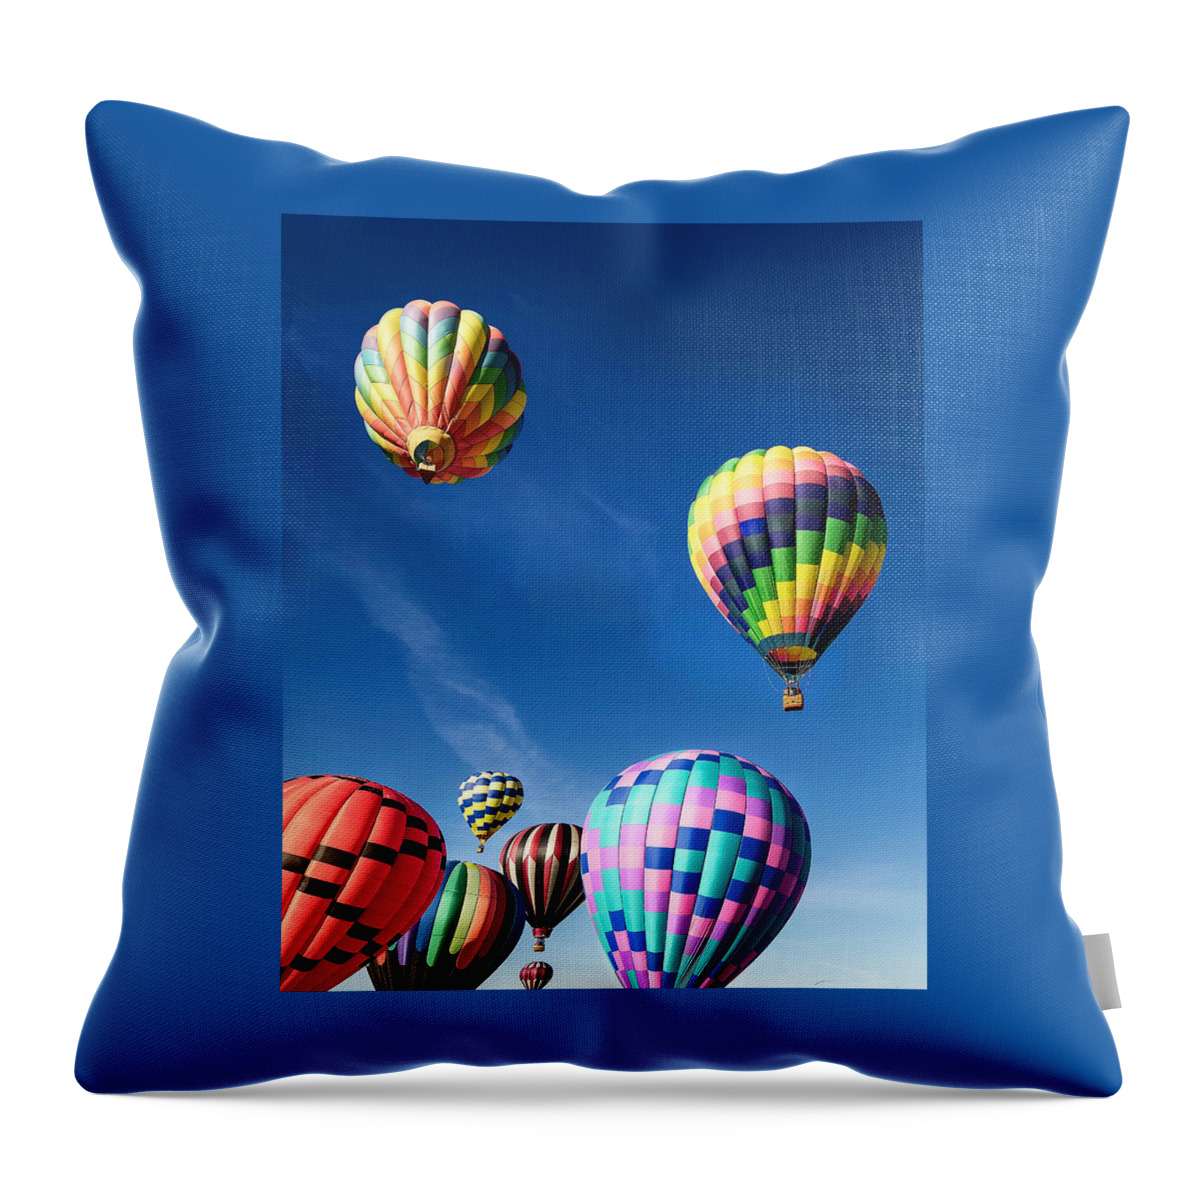 2018 Throw Pillow featuring the photograph Up in a Hot Air Balloon 2 by James Sage